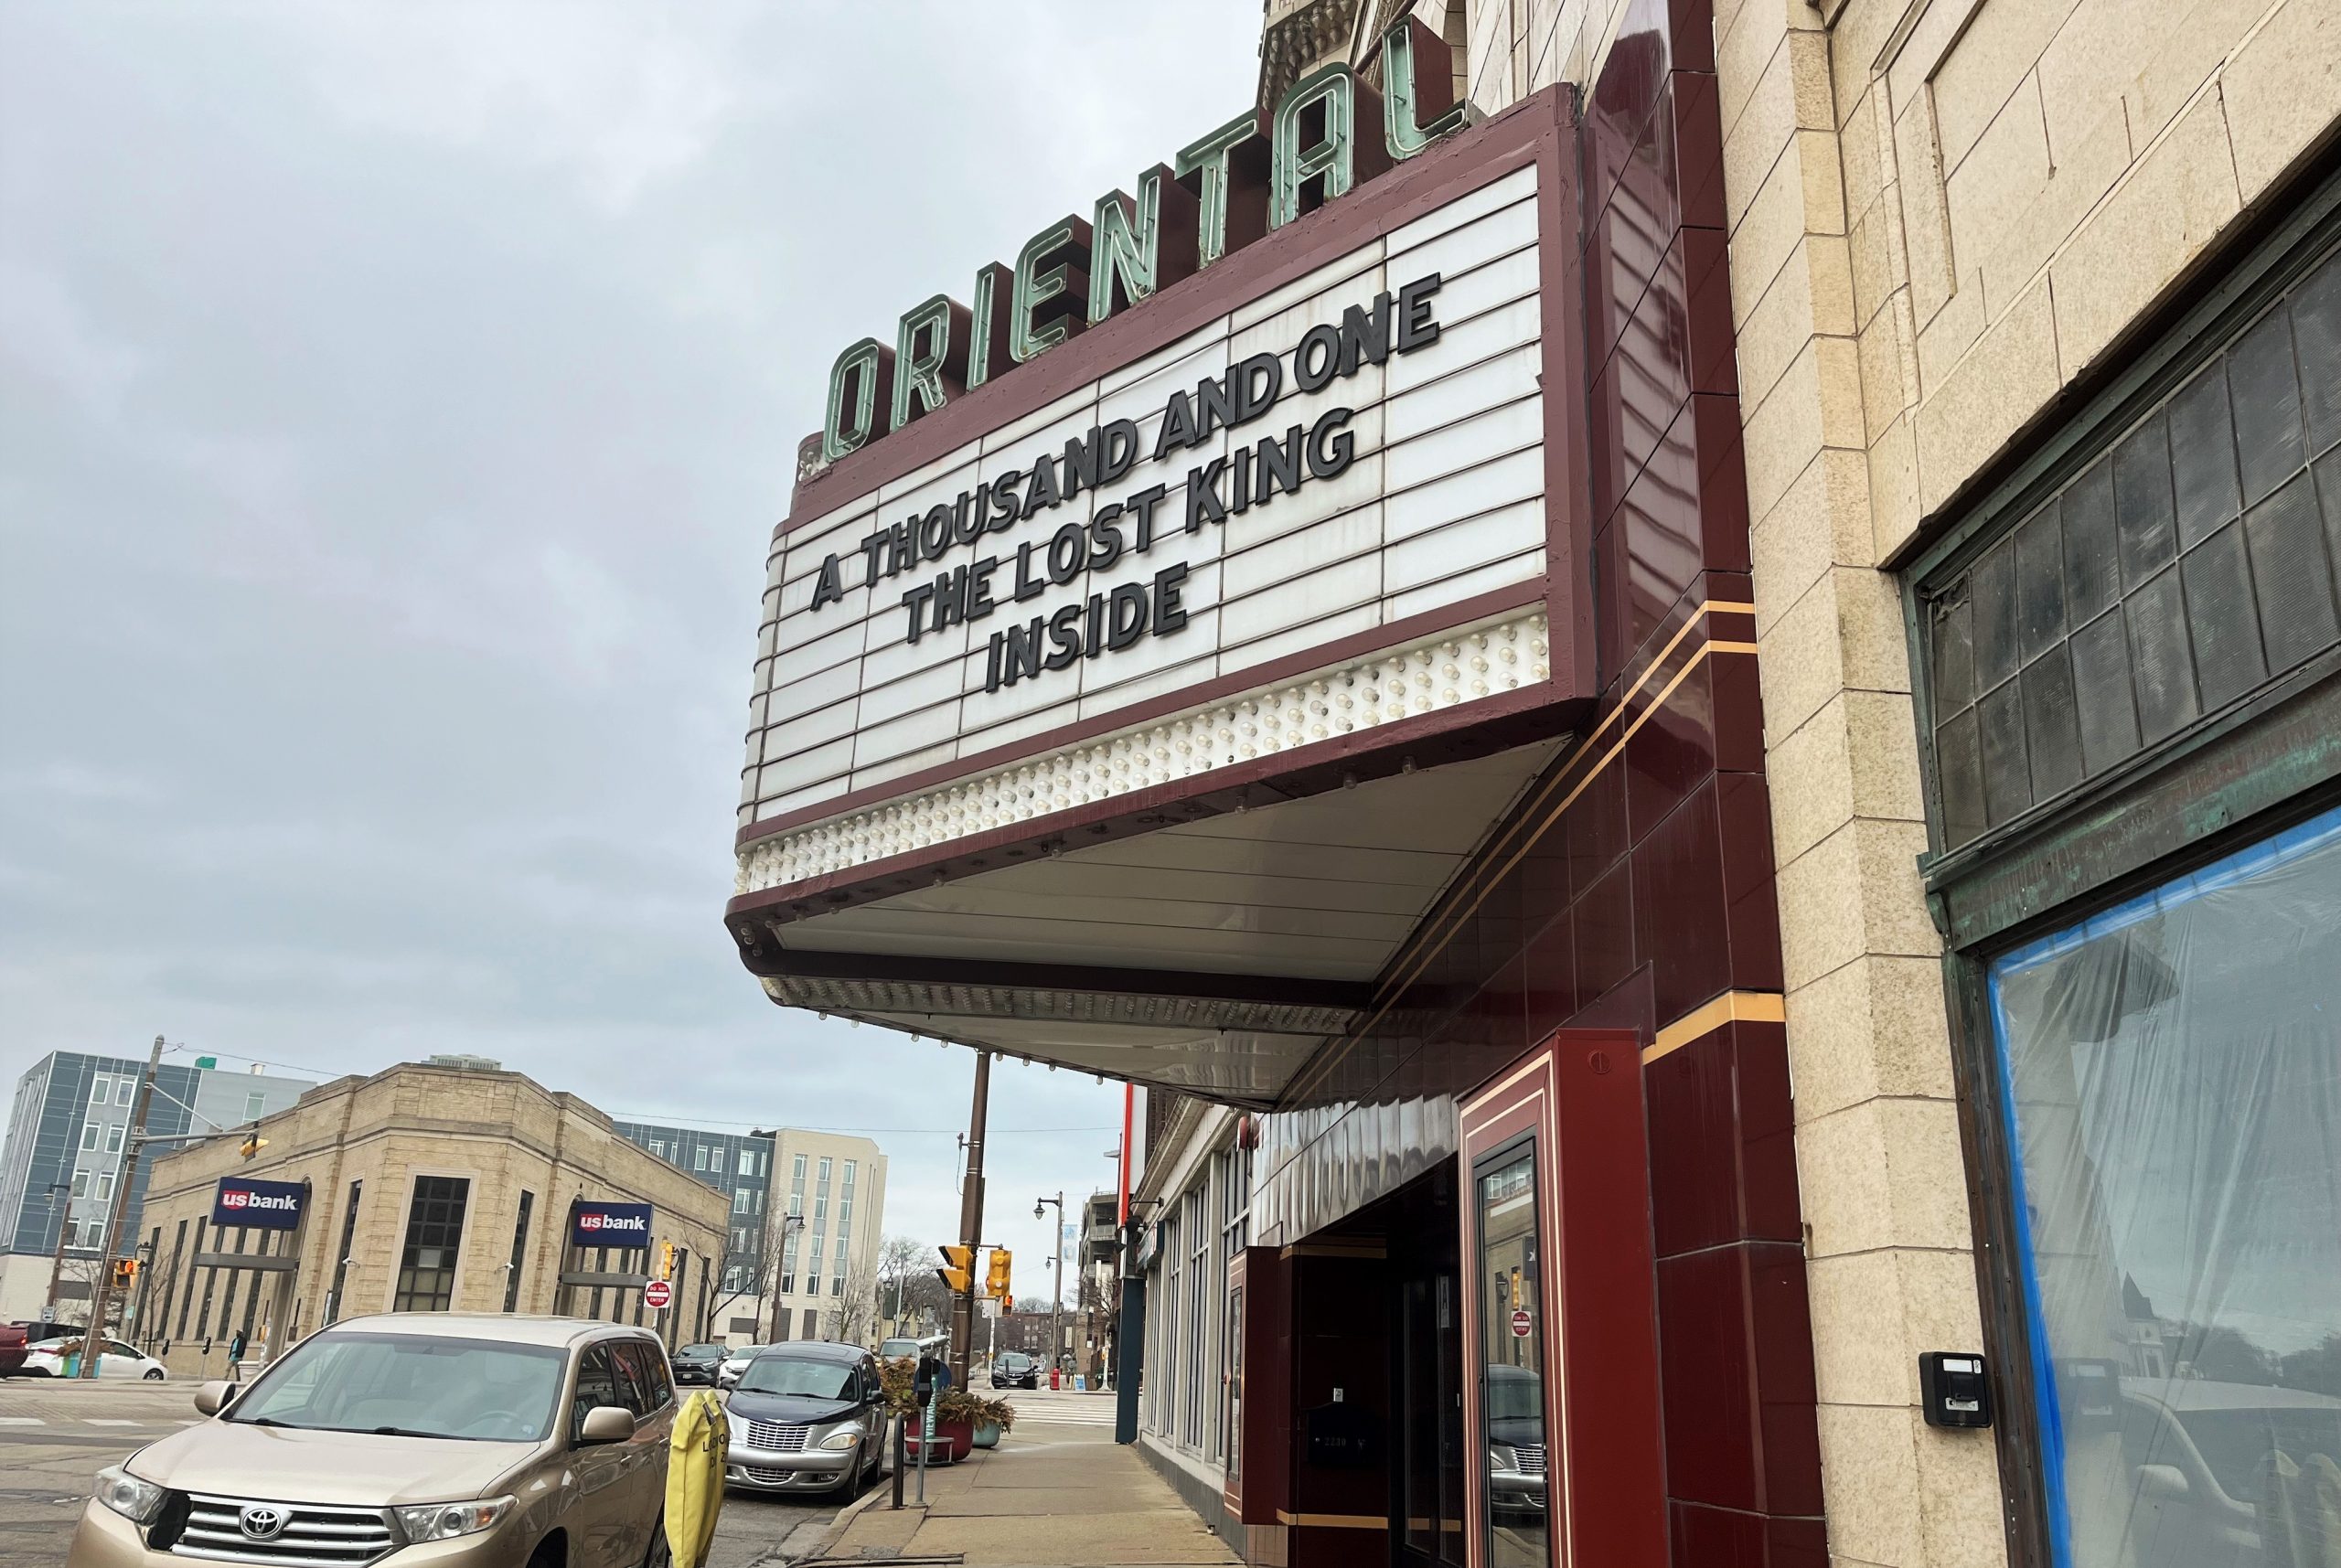 The Oriental Theatre, 2230 N. Farwell Ave. Photo taken March 31, 2023 by Sophie Bolich.